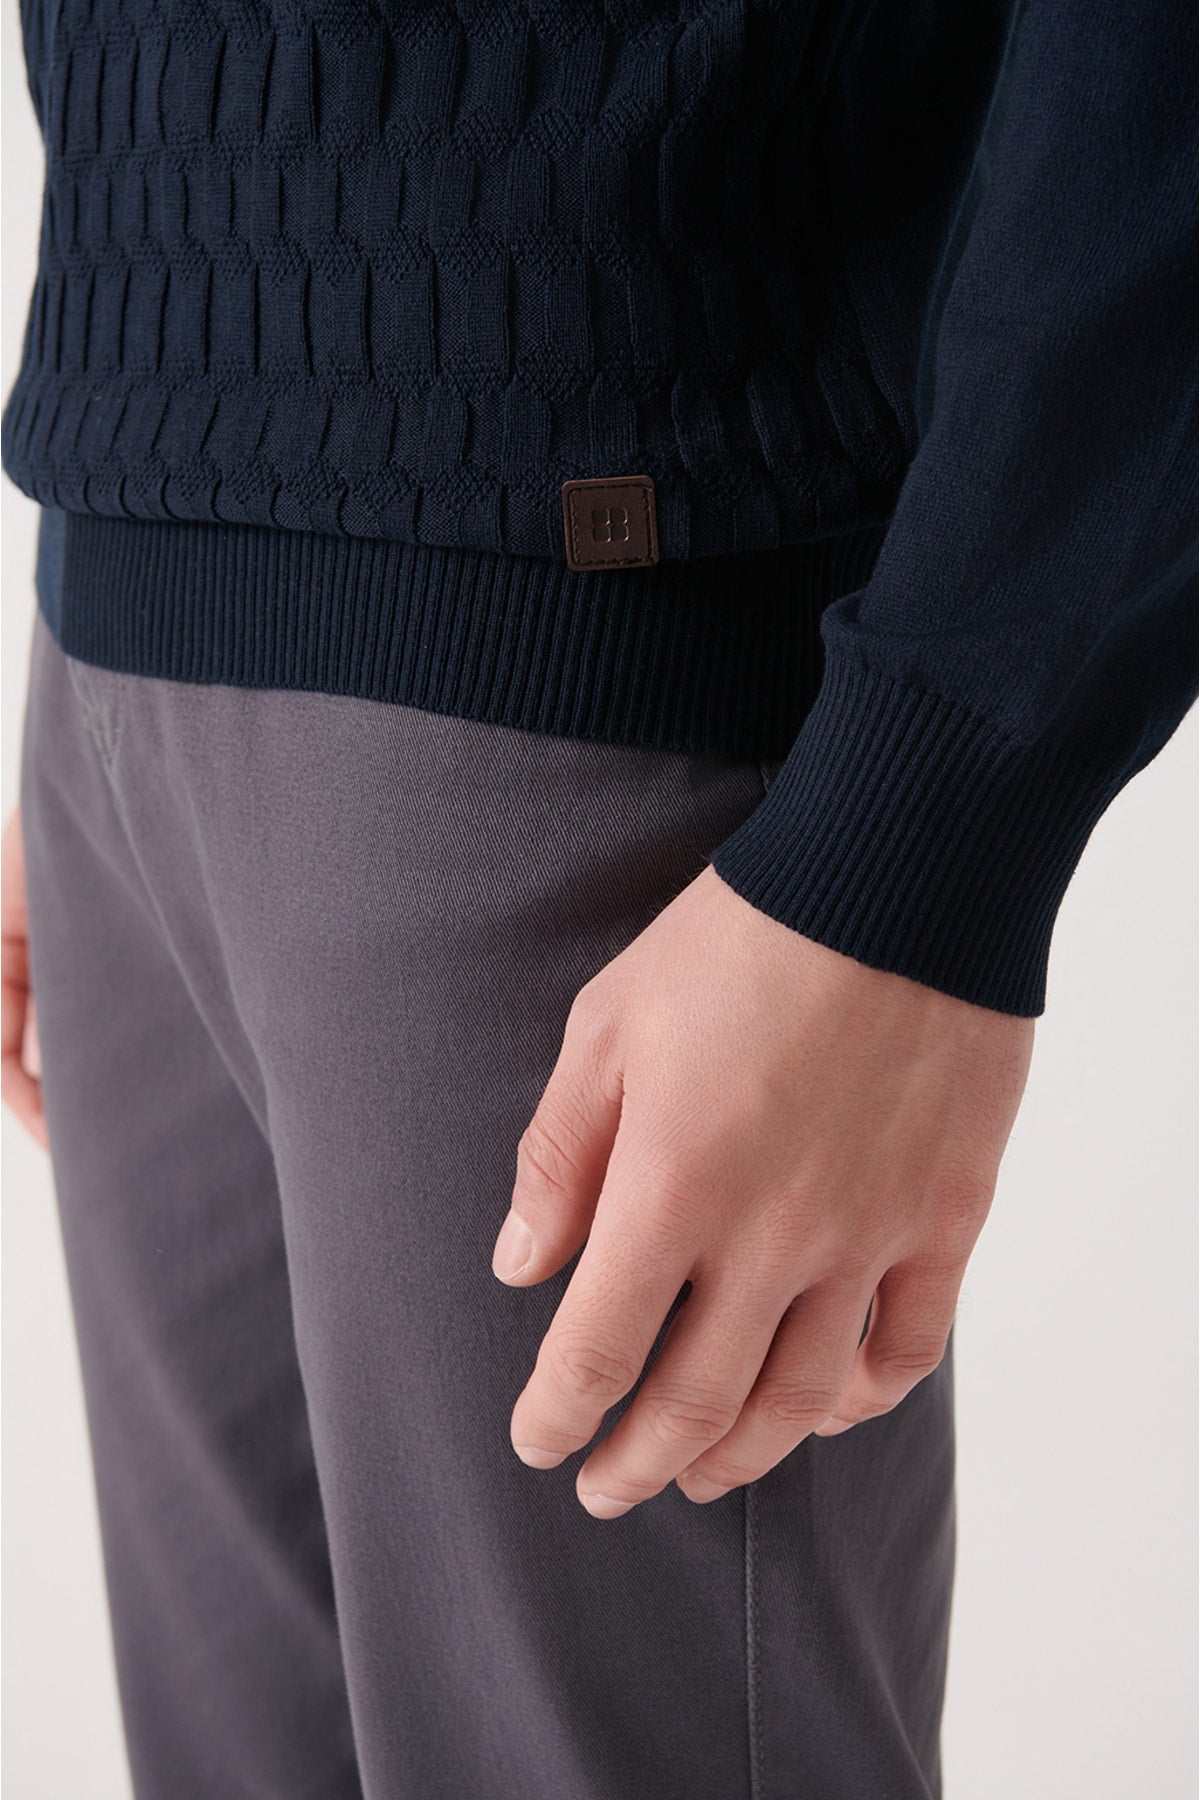 Men's navy blue half -fisherman in front of the collar textured cotton knitwear sweater E005106